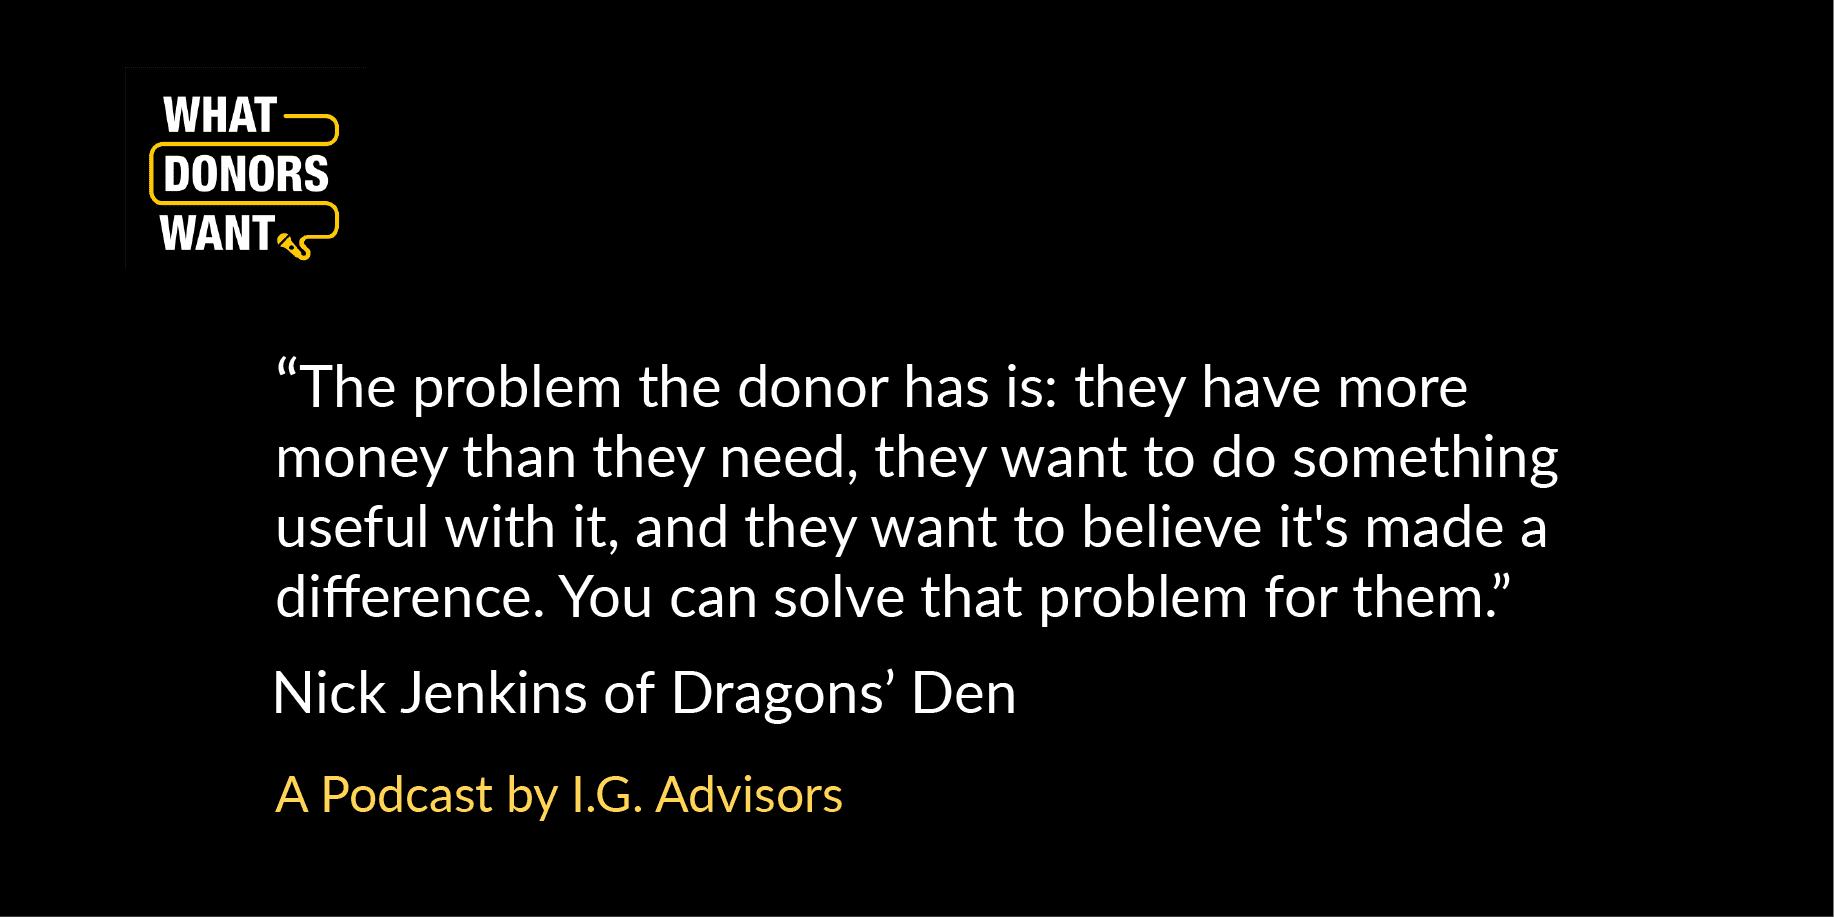 Nick Jones' quote for What Donors Want